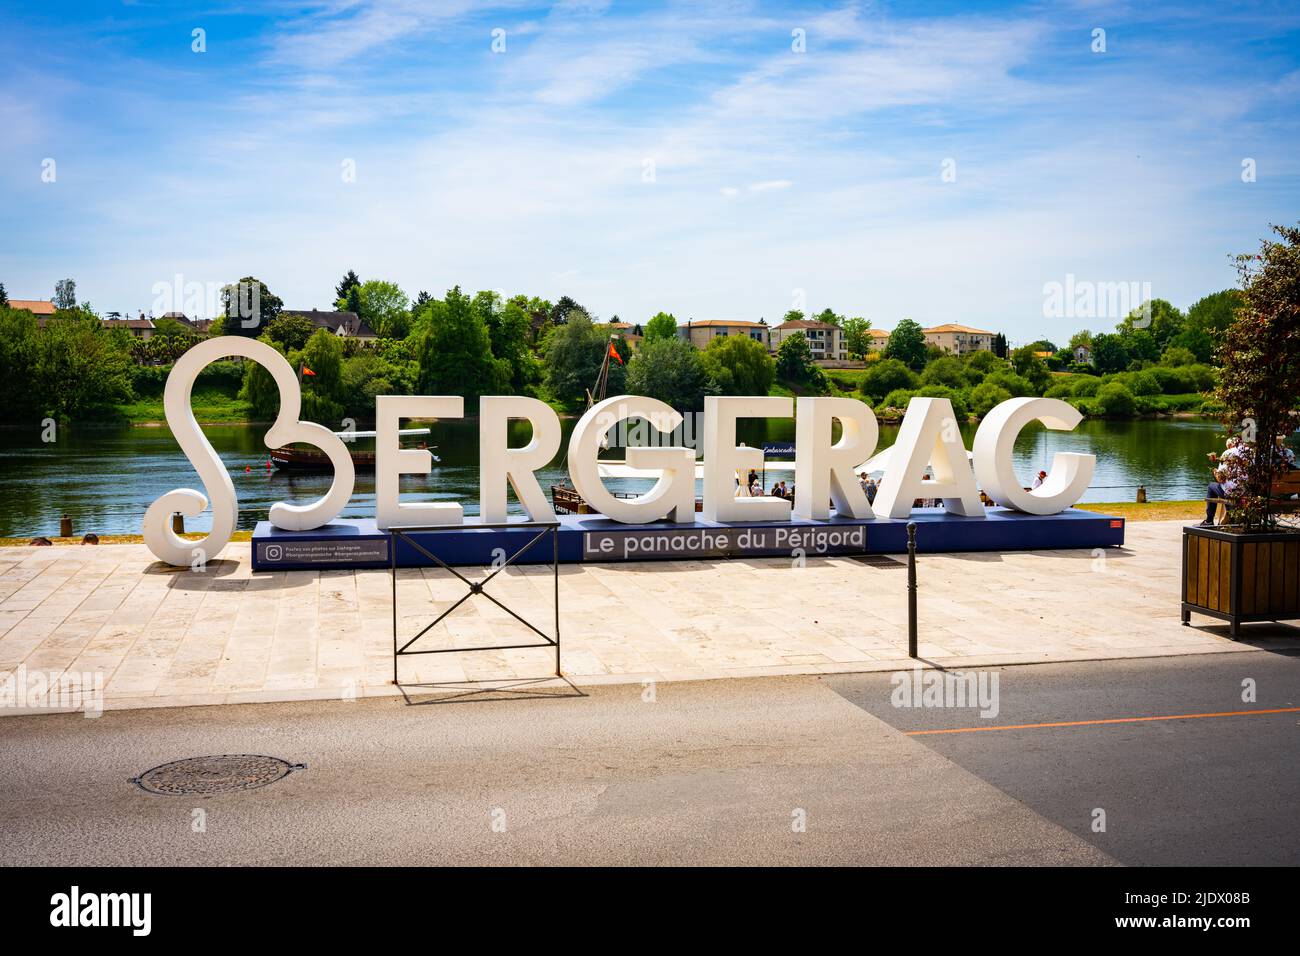 Bergerac, France - May 10th 2022 - Touristic Bergerac sign at the riverside of town Stock Photo